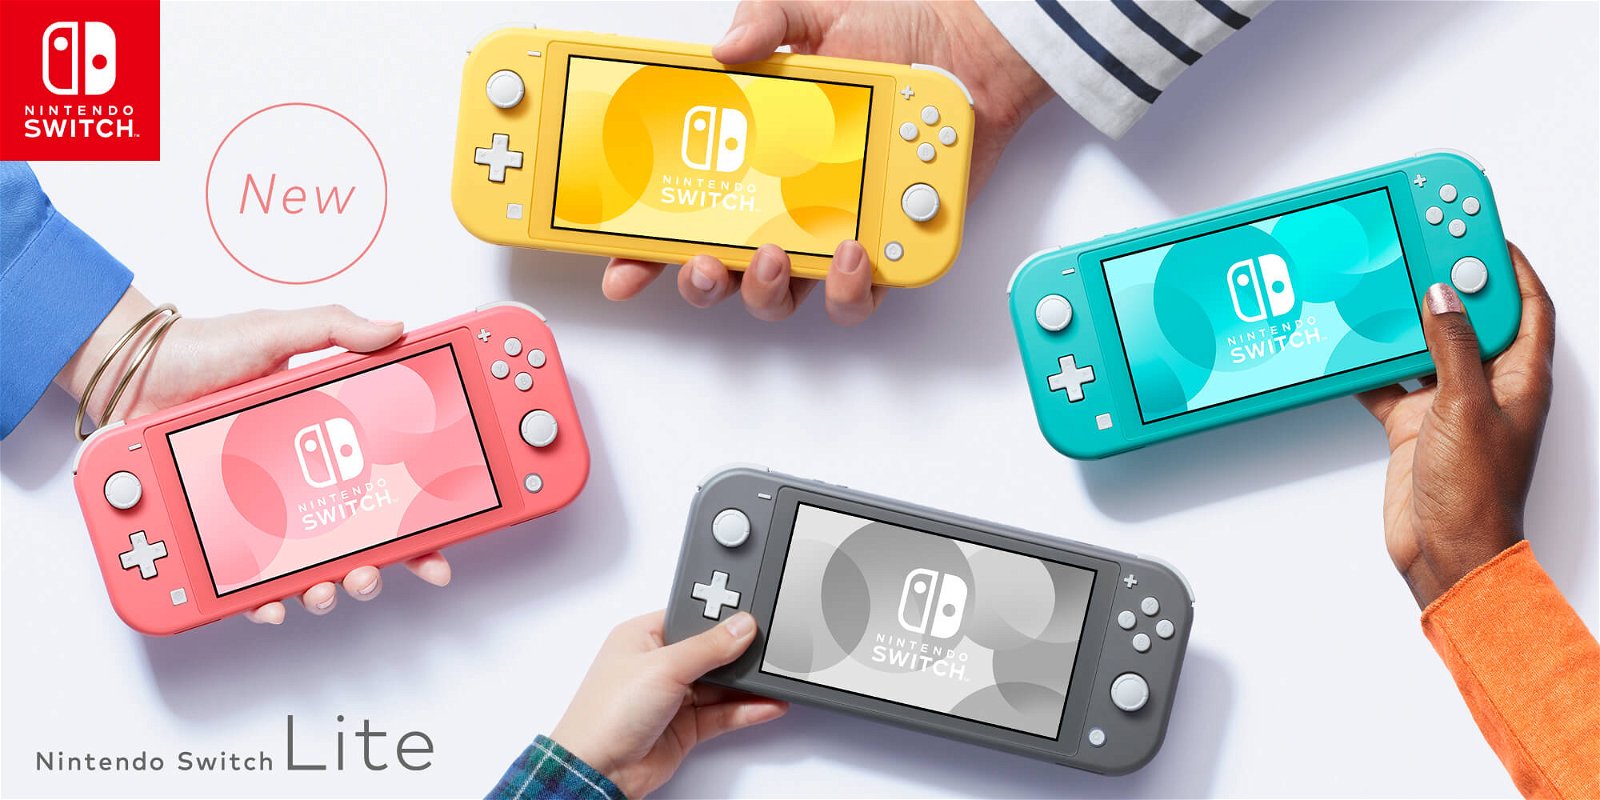 Nintendo: NEW IN! Introducing the coral Nintendo Switch Lite | Milled